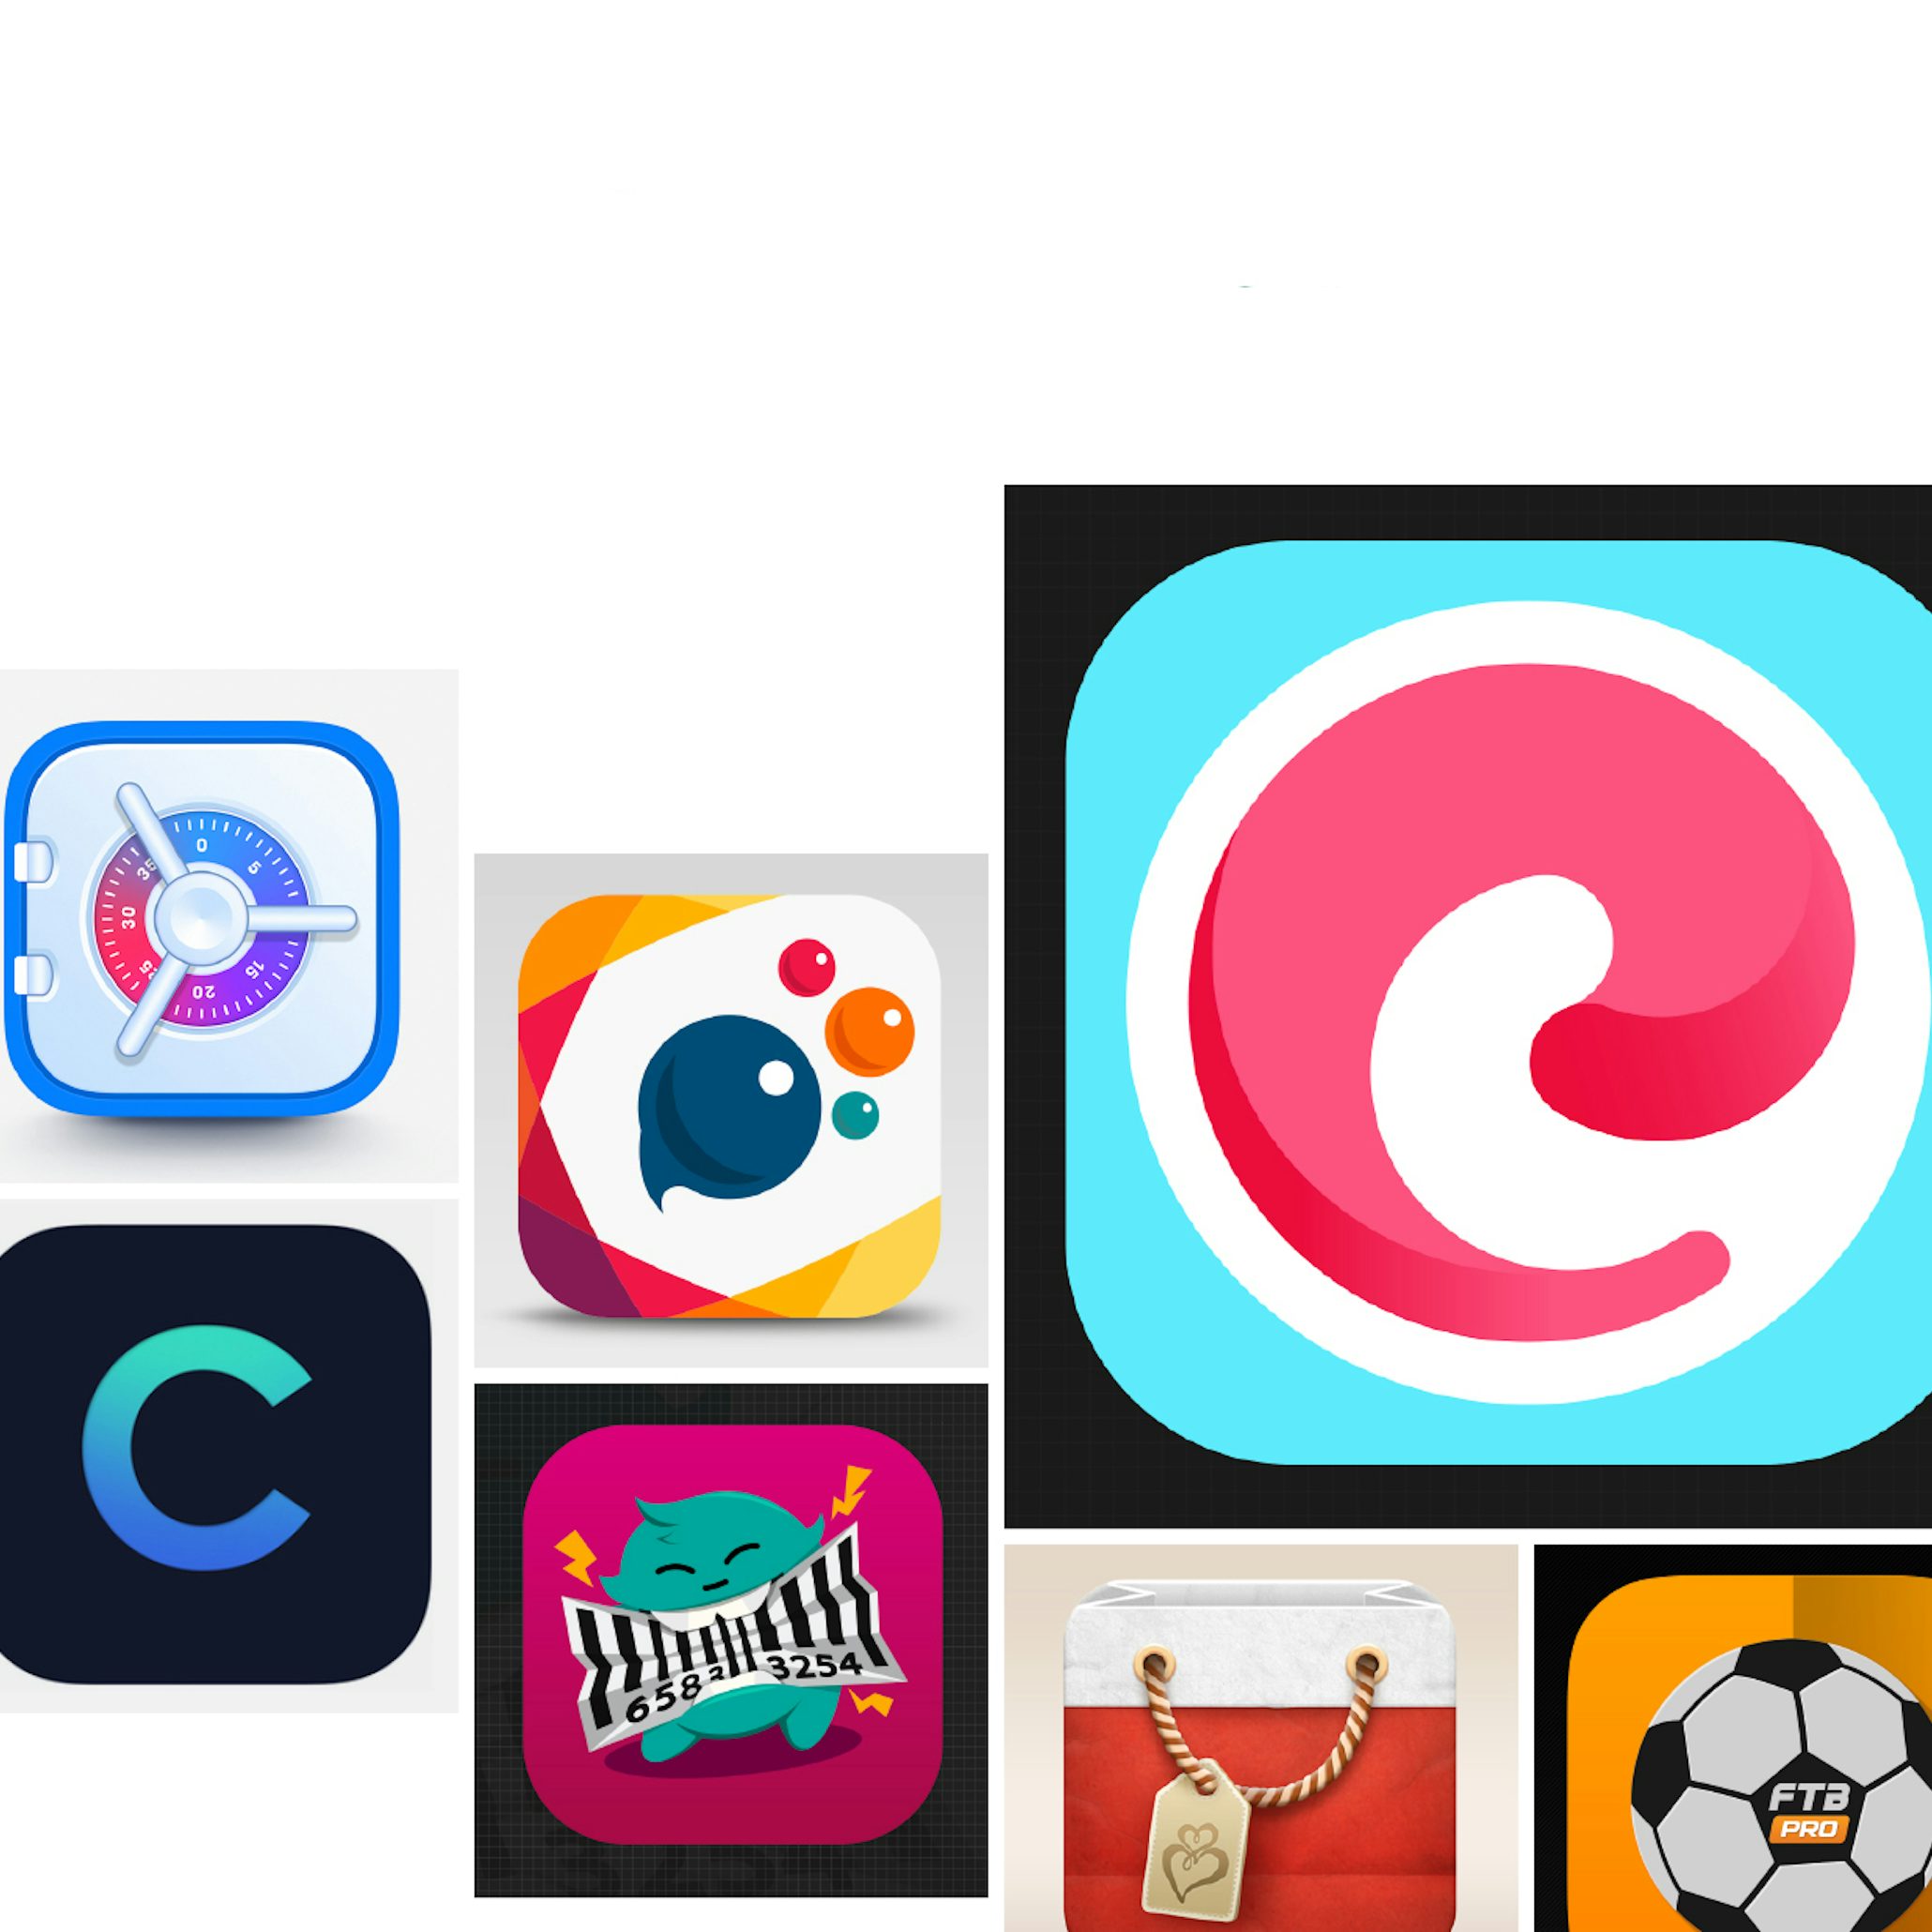 28 Awesome App Icons For Inspiration 99designs